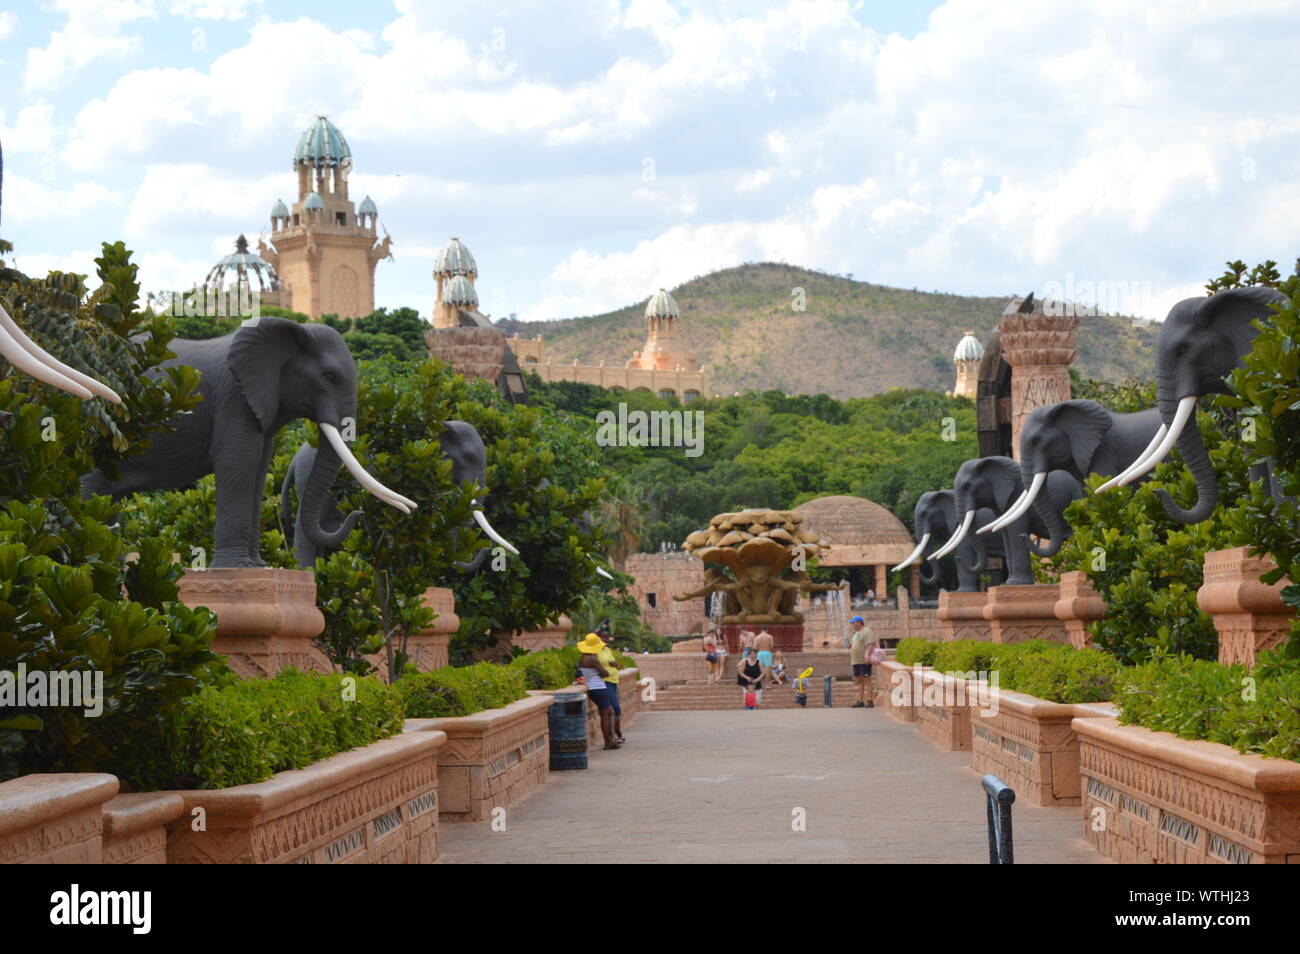 Sun city or suncity in North west province South Africa Stock Photo